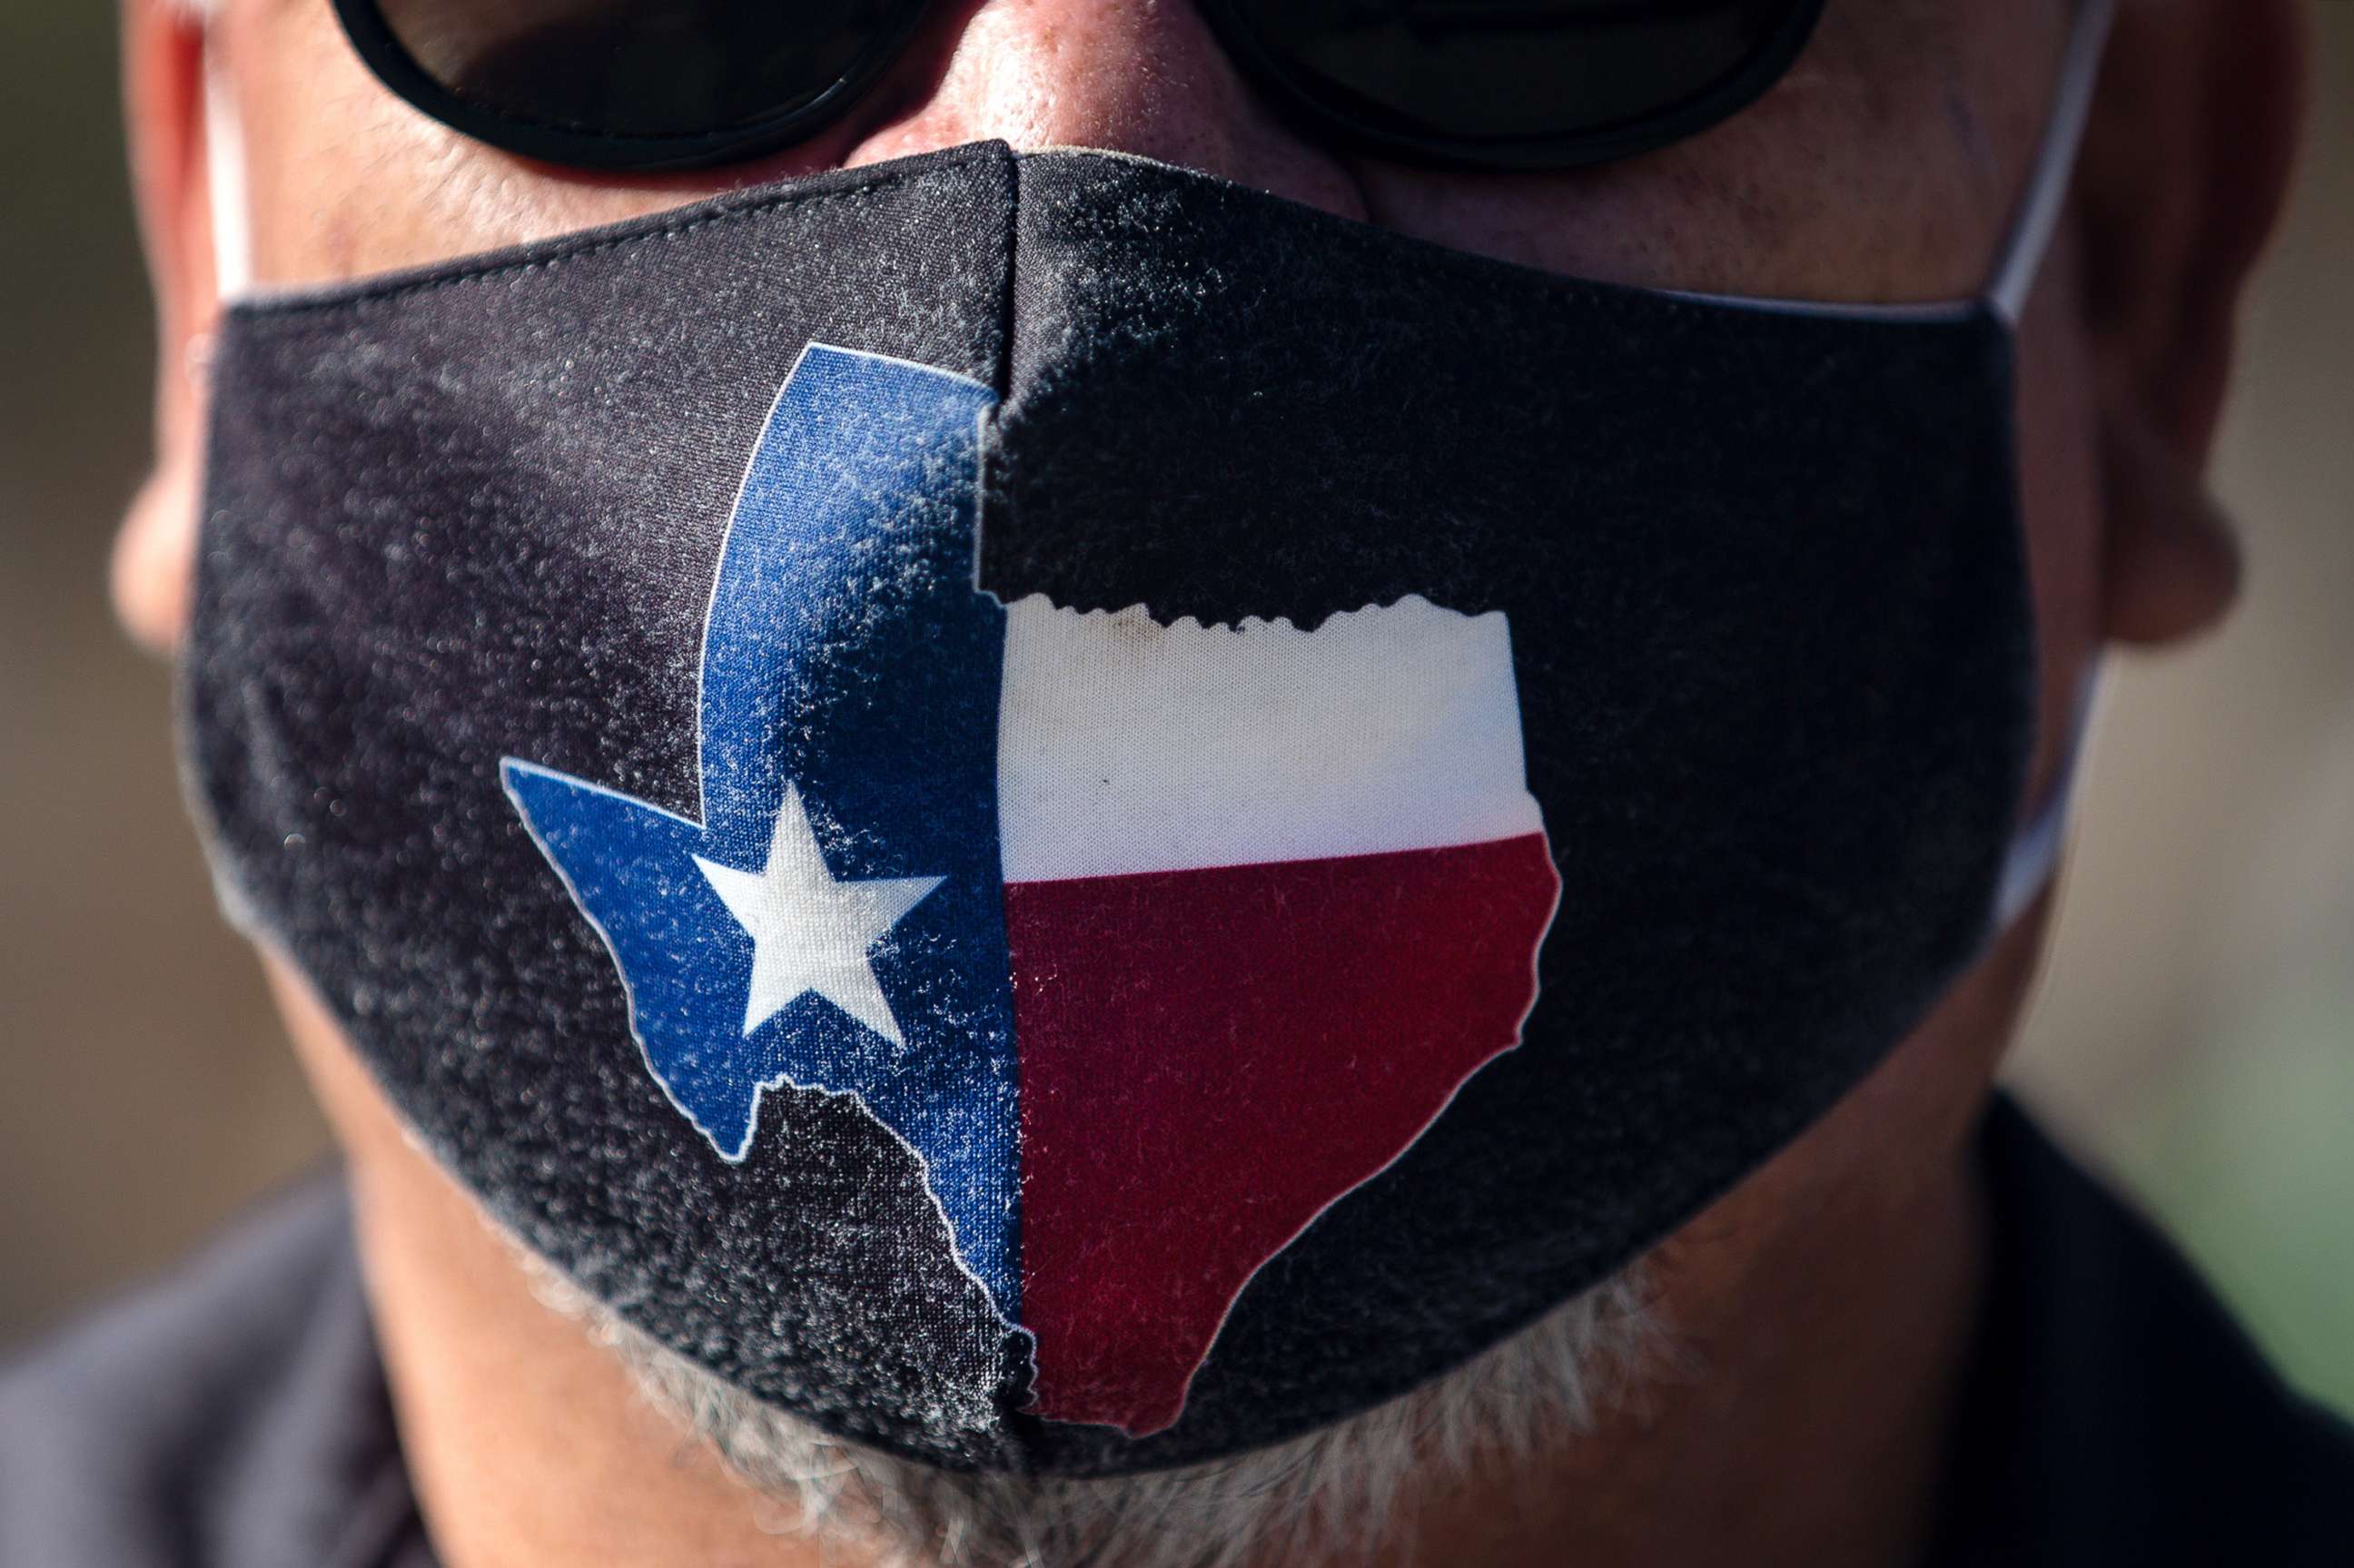 PHOTO: A man wears a Texas-themed mask on March 3, 2021 in Austin, Texas. Gov. Greg Abbott announced a new executive order that will end the statewide mask mandate and allow businesses to reopen at 100% capacity on March 10, 2021. 